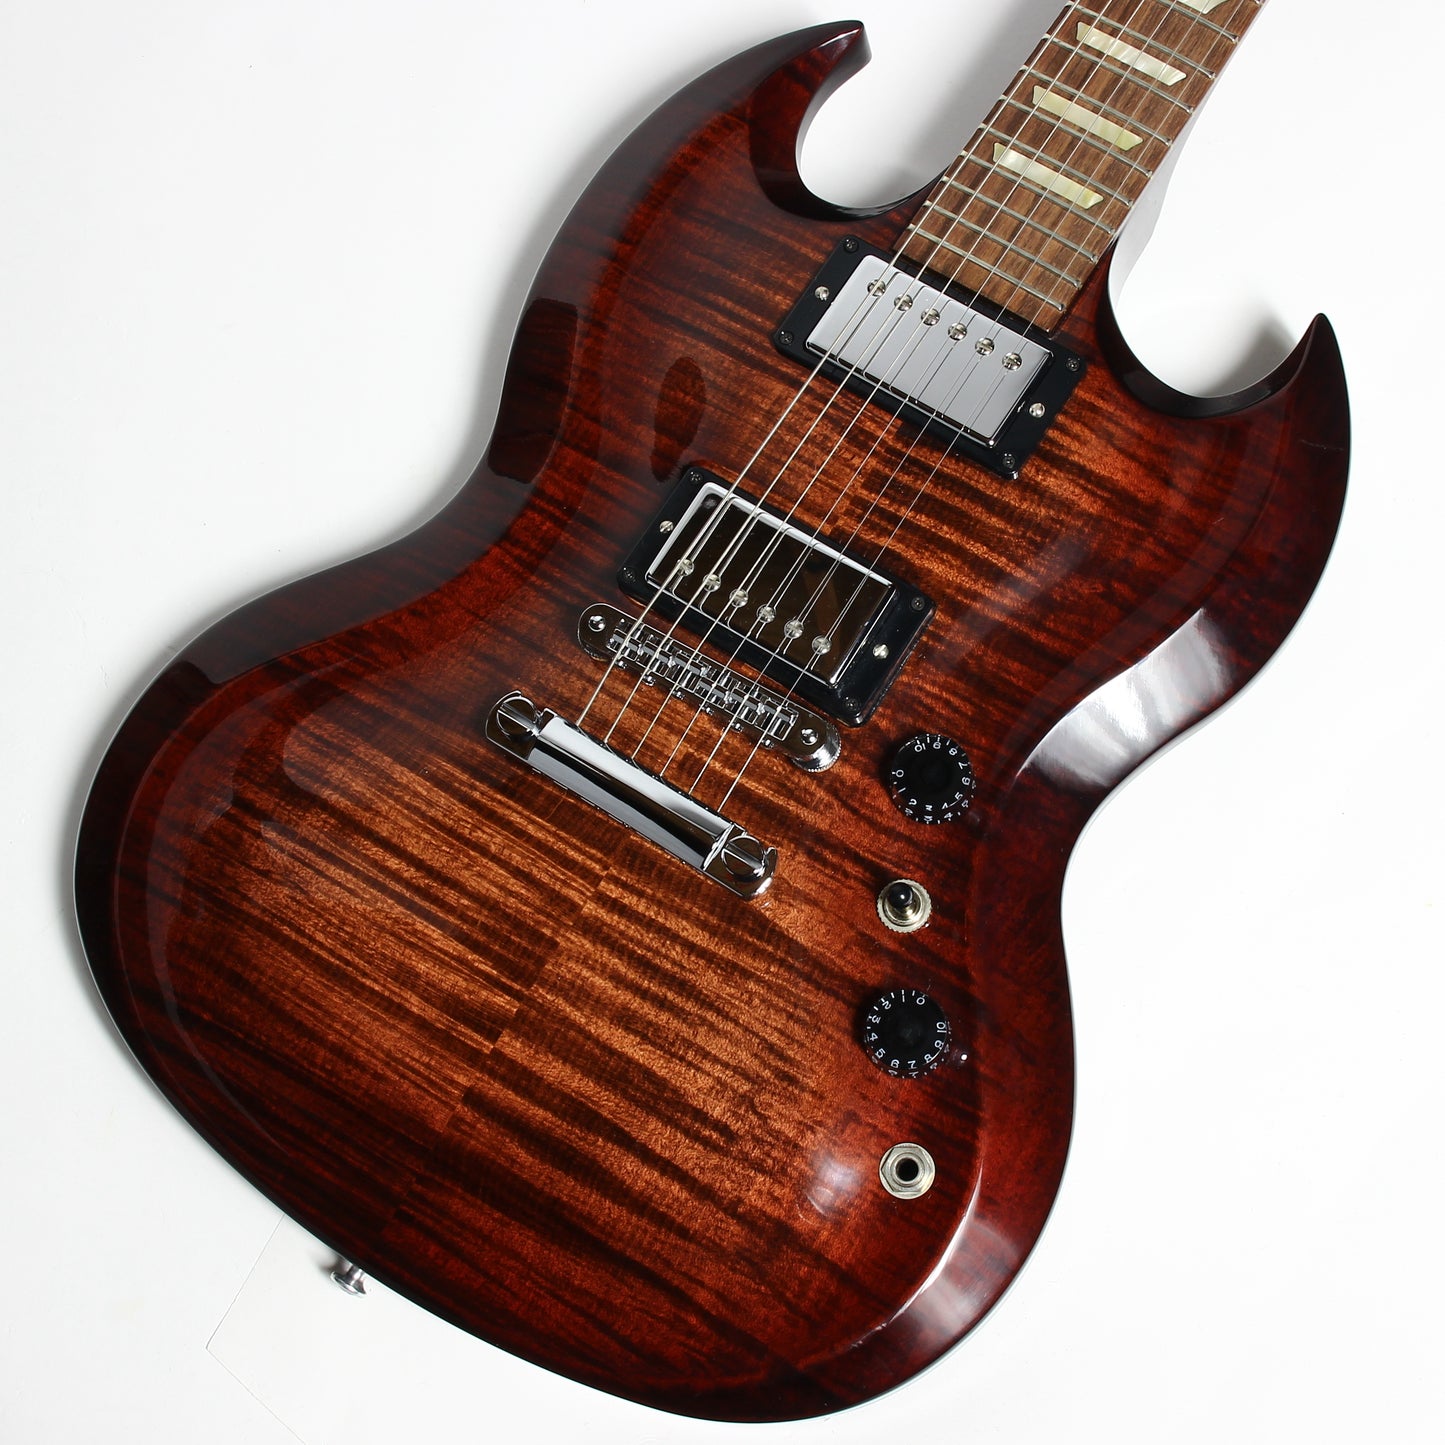 MINT! 2009 Gibson Limited Run SG Carved Top Guitar of the Month GOTM Flametop - Autumn Burst, supreme standard diablo